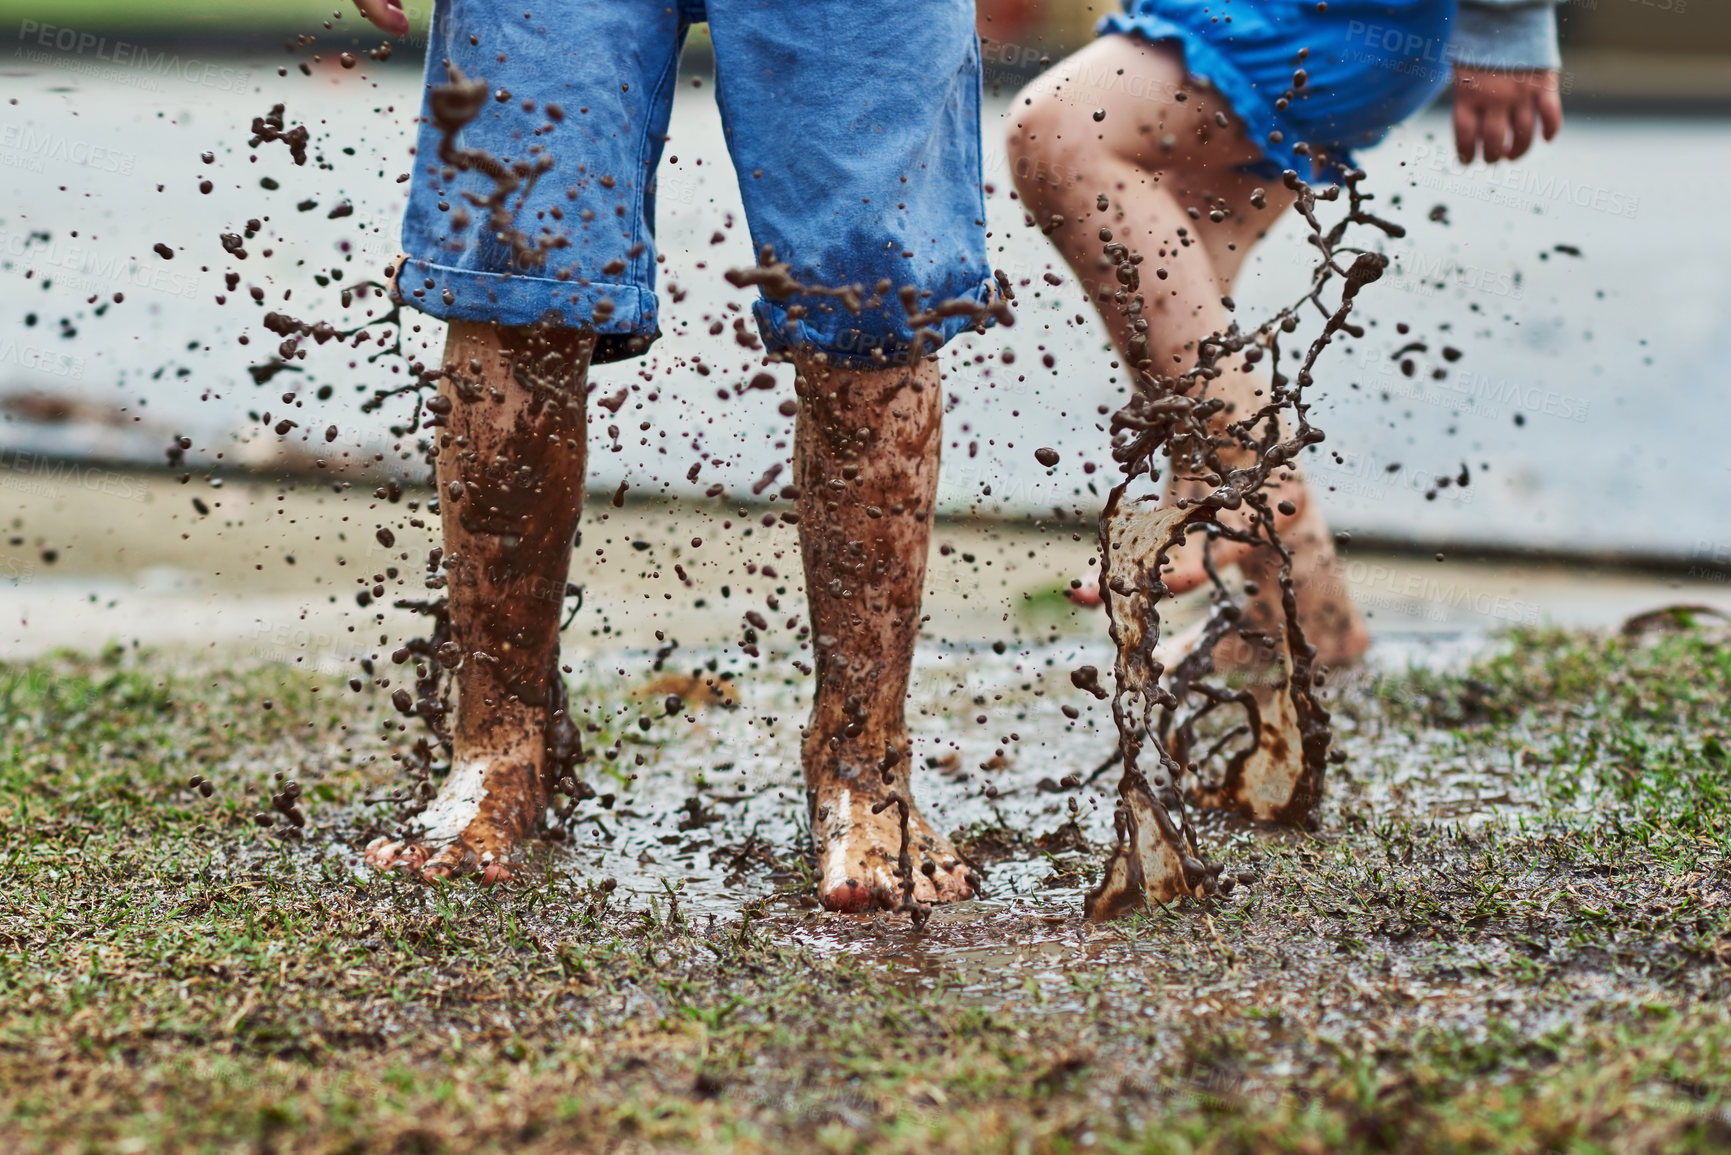 Buy stock photo Low angle shot of two unrecognizable children jumping around in mud outside during a rainy day